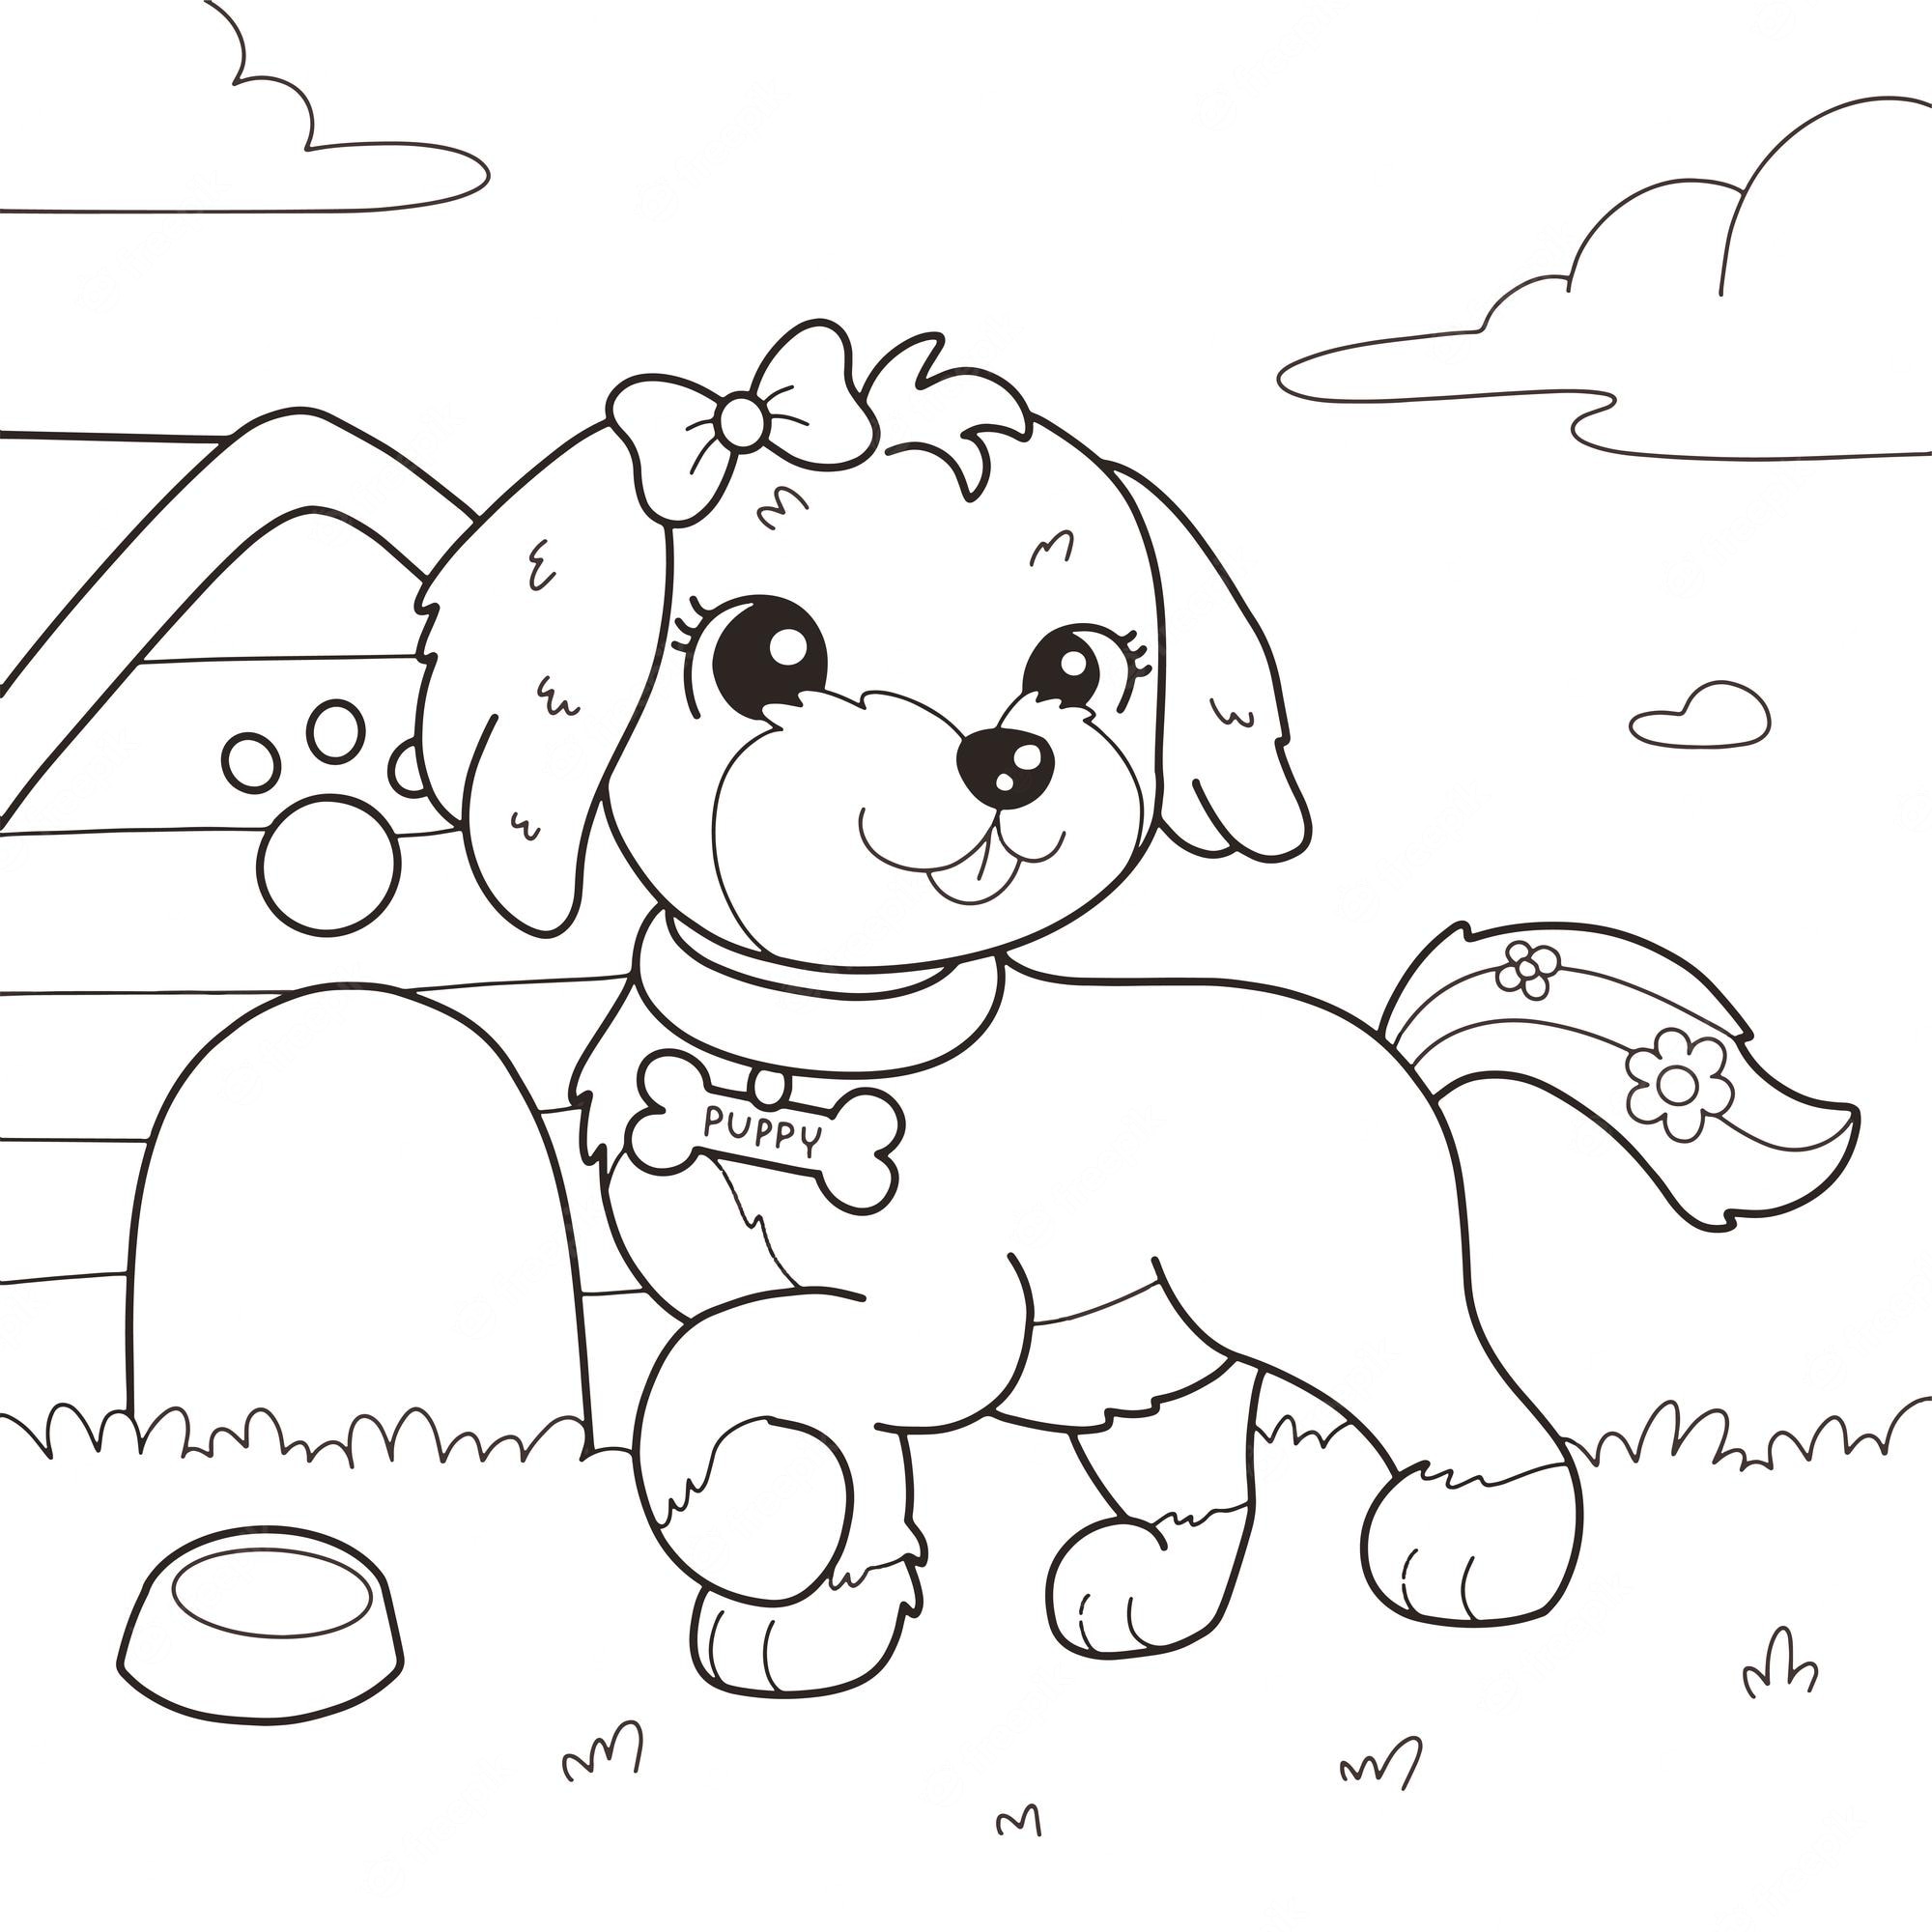 Puppy coloring page for Kids - SheetalColor.com